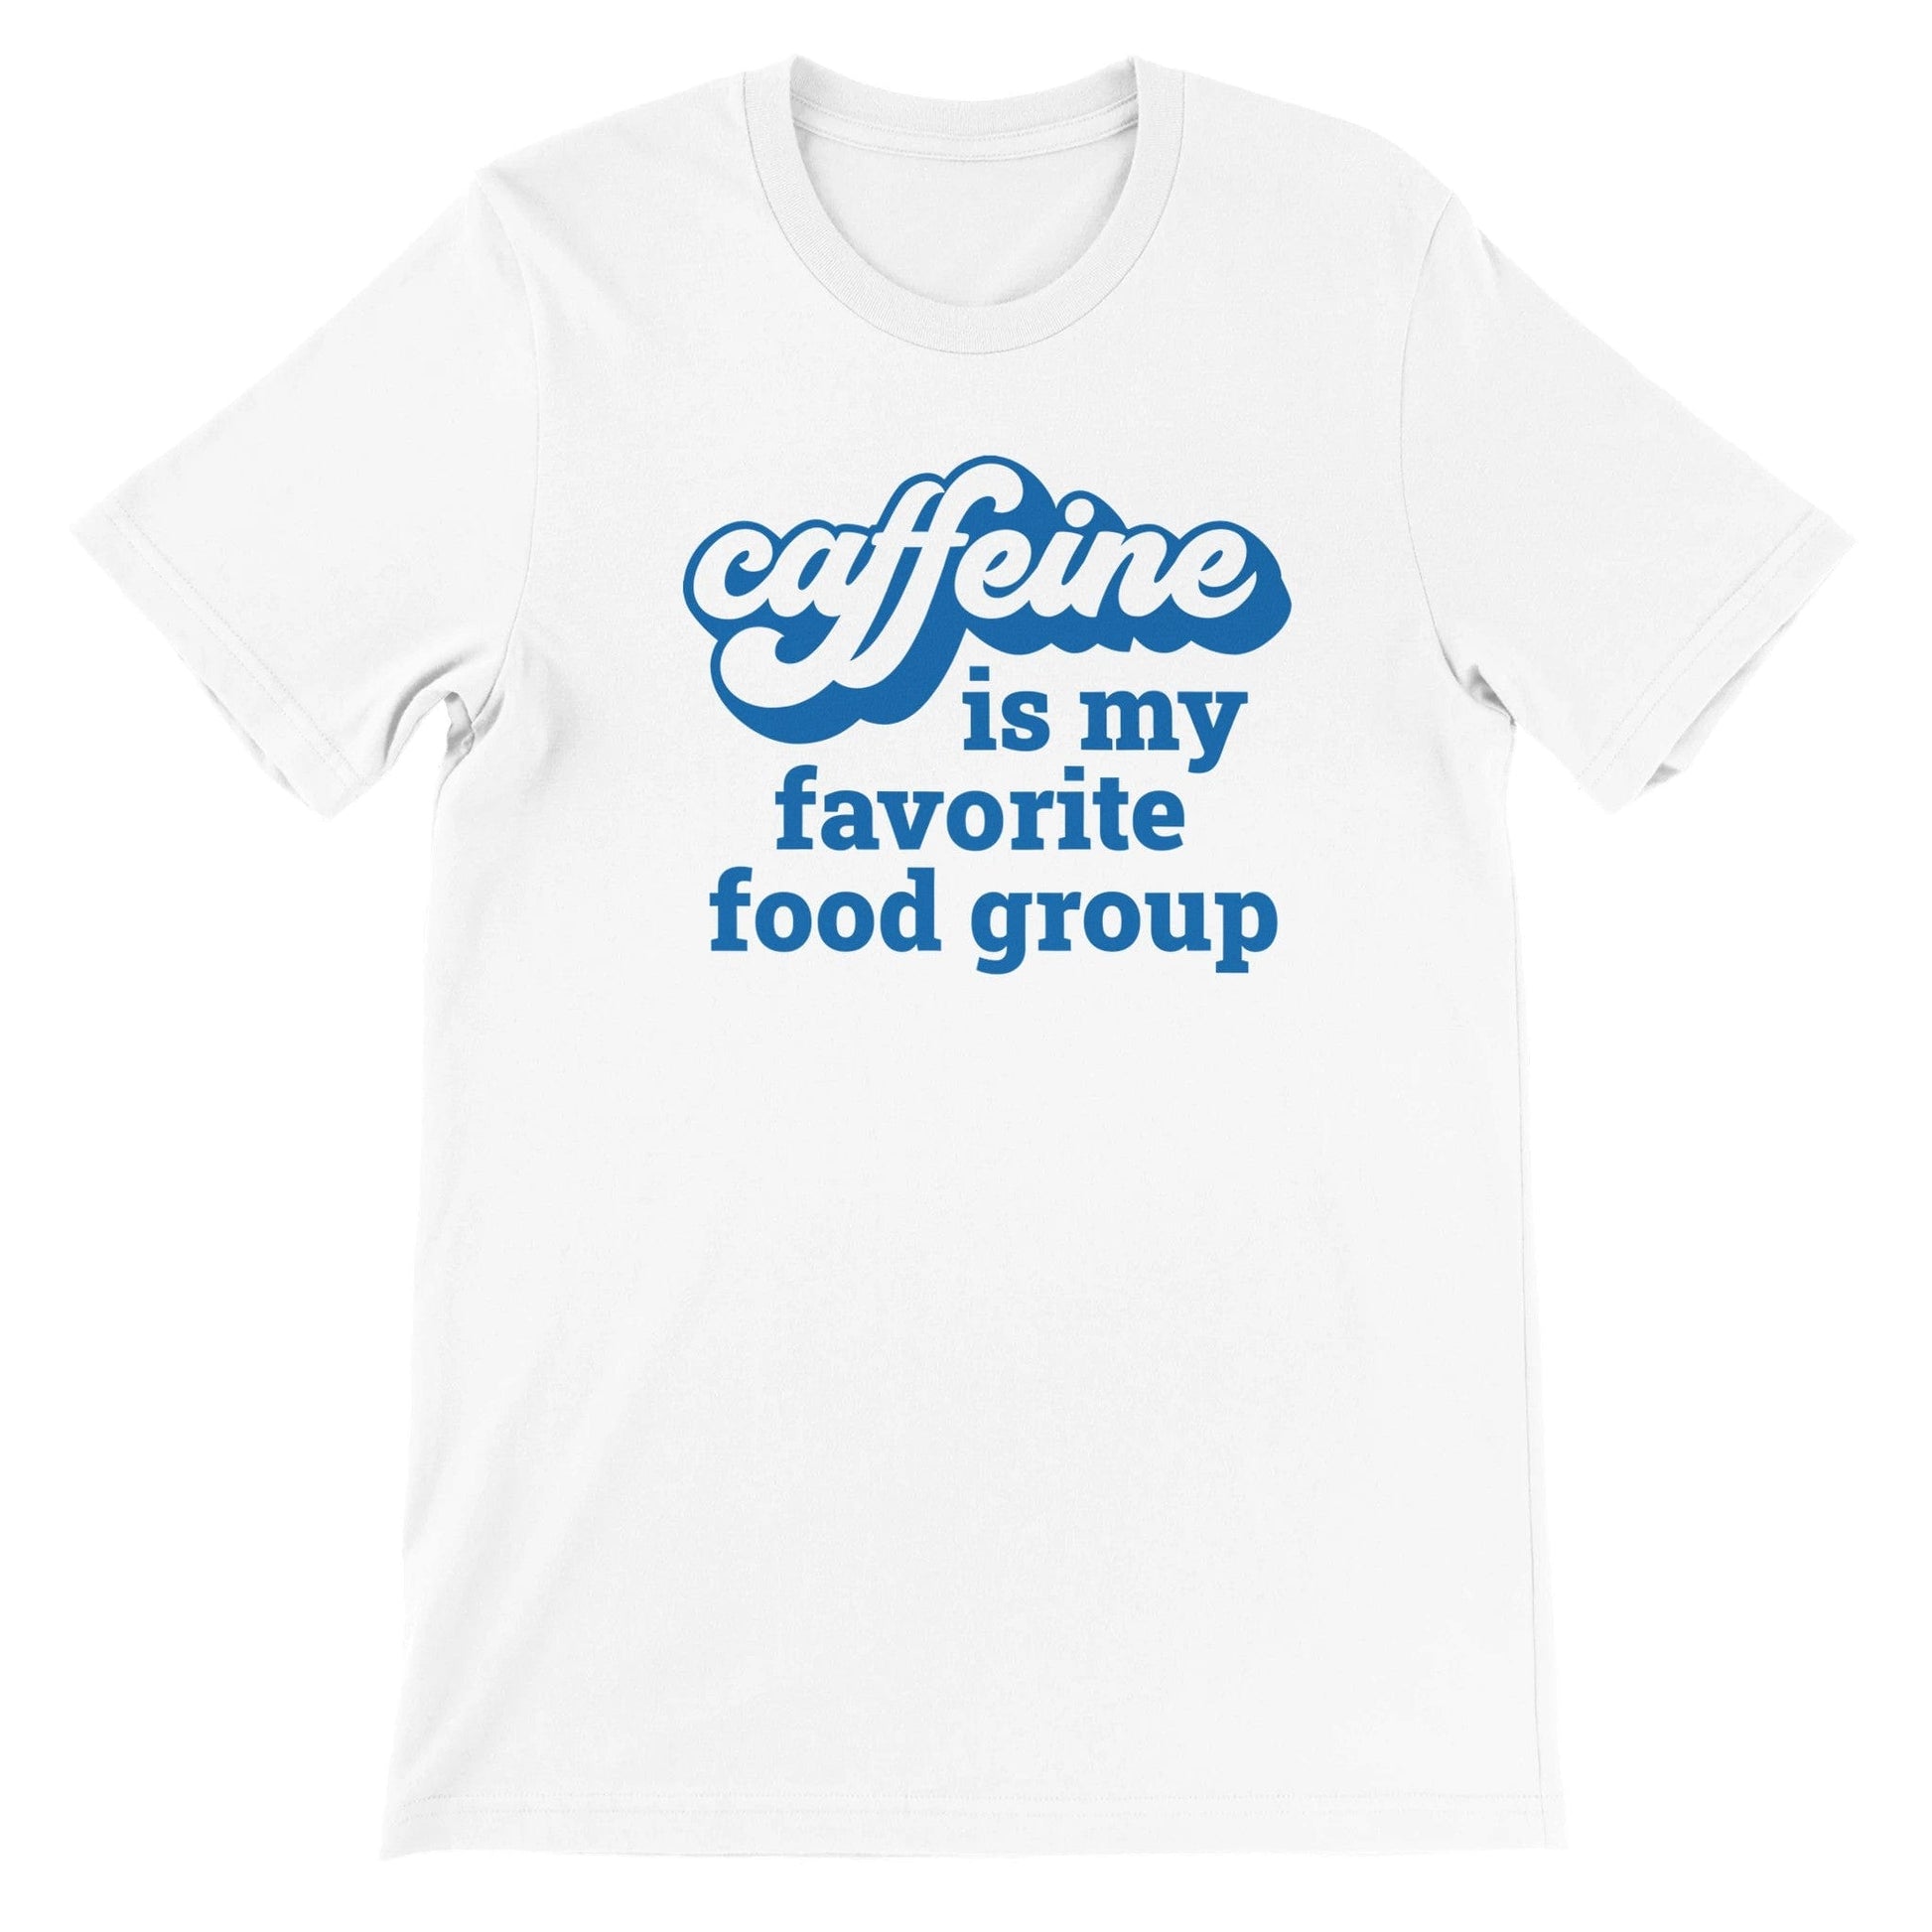 Good Bean Gifts "Caffeine is my favorite food group" Unisex Crewneck T-shirt White / S